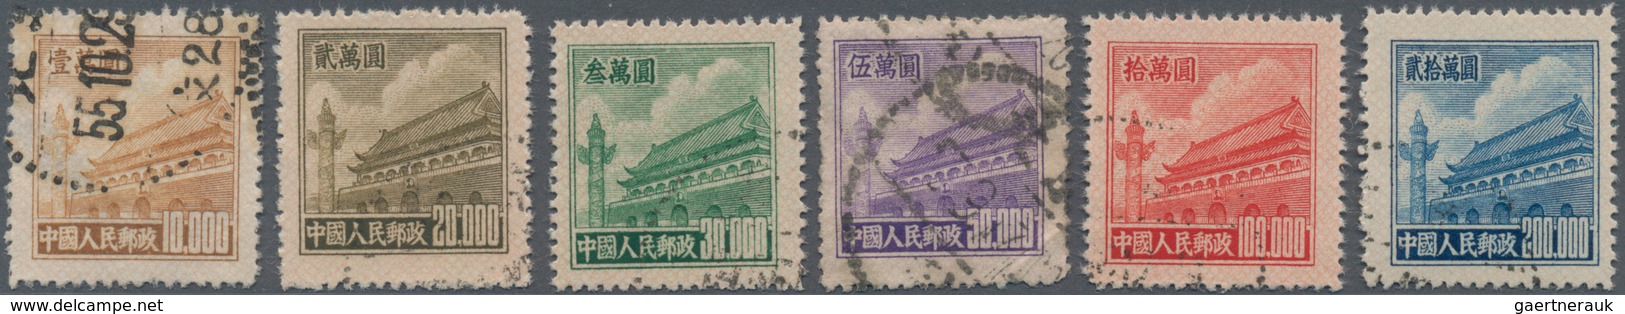 China - Volksrepublik: 1951, Tiananmen Difinitives (R5), Set Of 6, Used, Michel 100 ($10,000) Thinne - Storia Postale